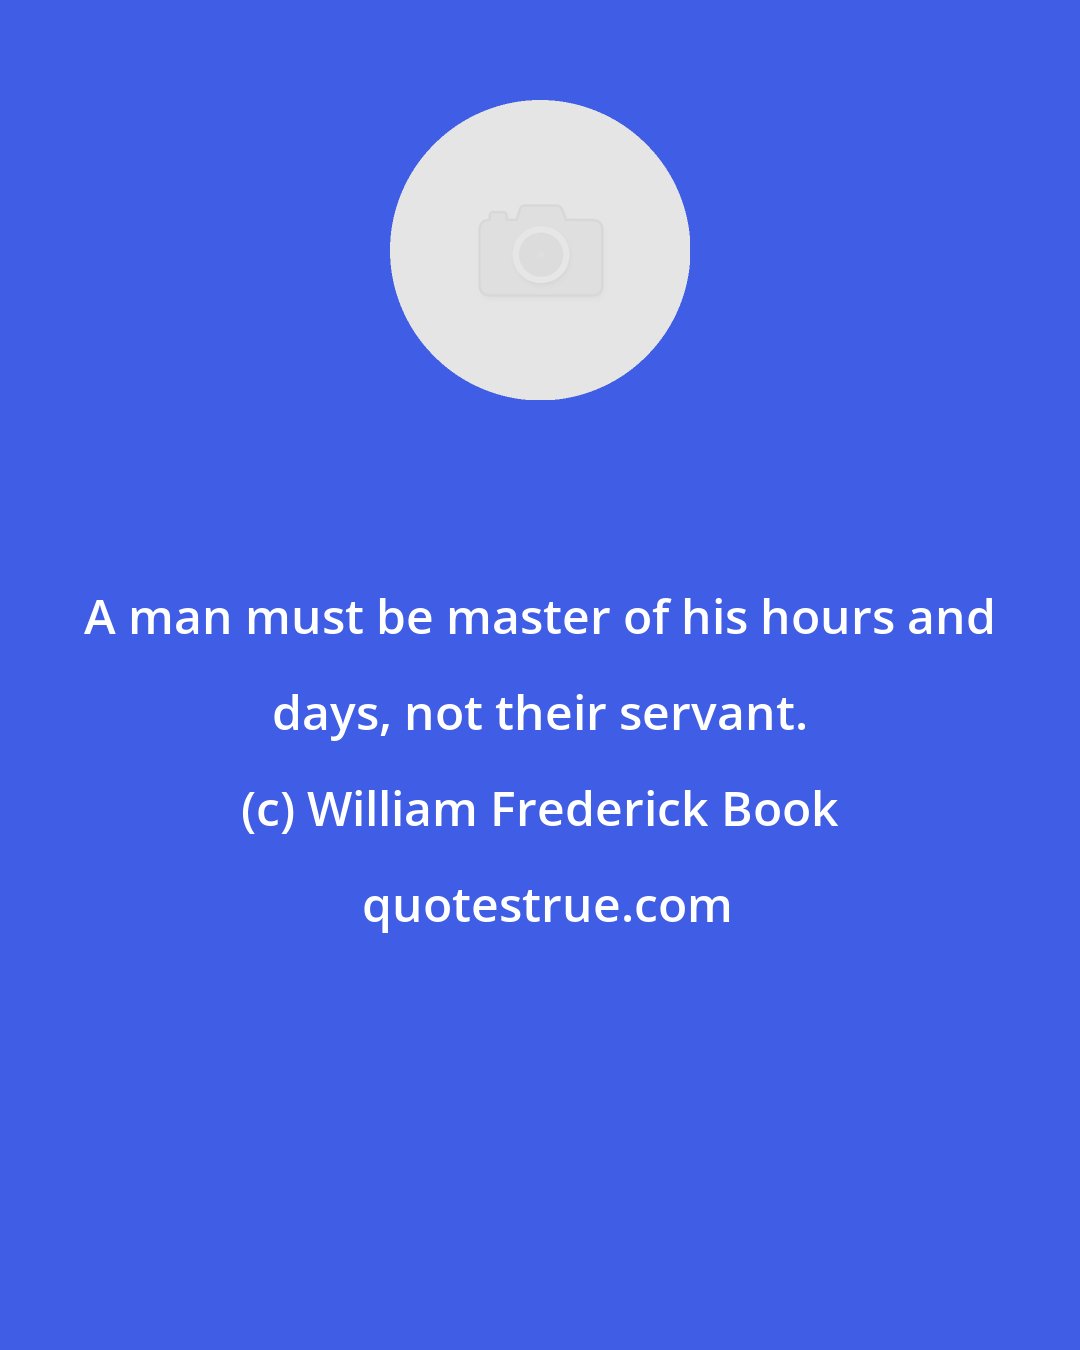 William Frederick Book: A man must be master of his hours and days, not their servant.